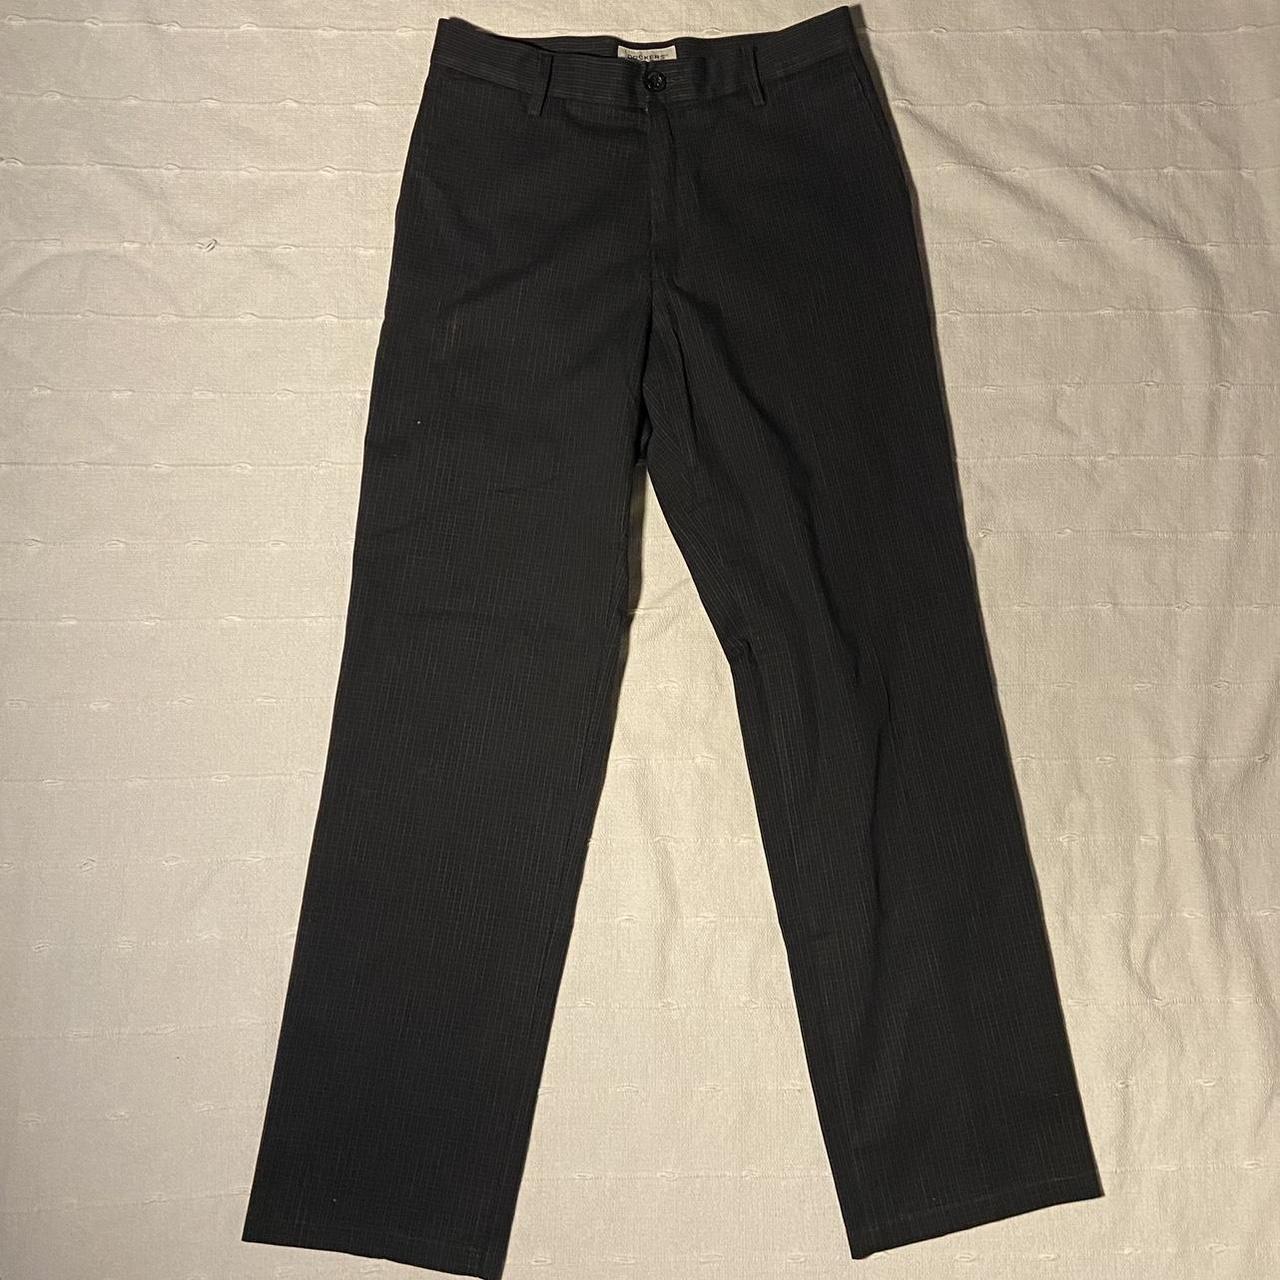 Dockers Women's Grey and Black Trousers (2)